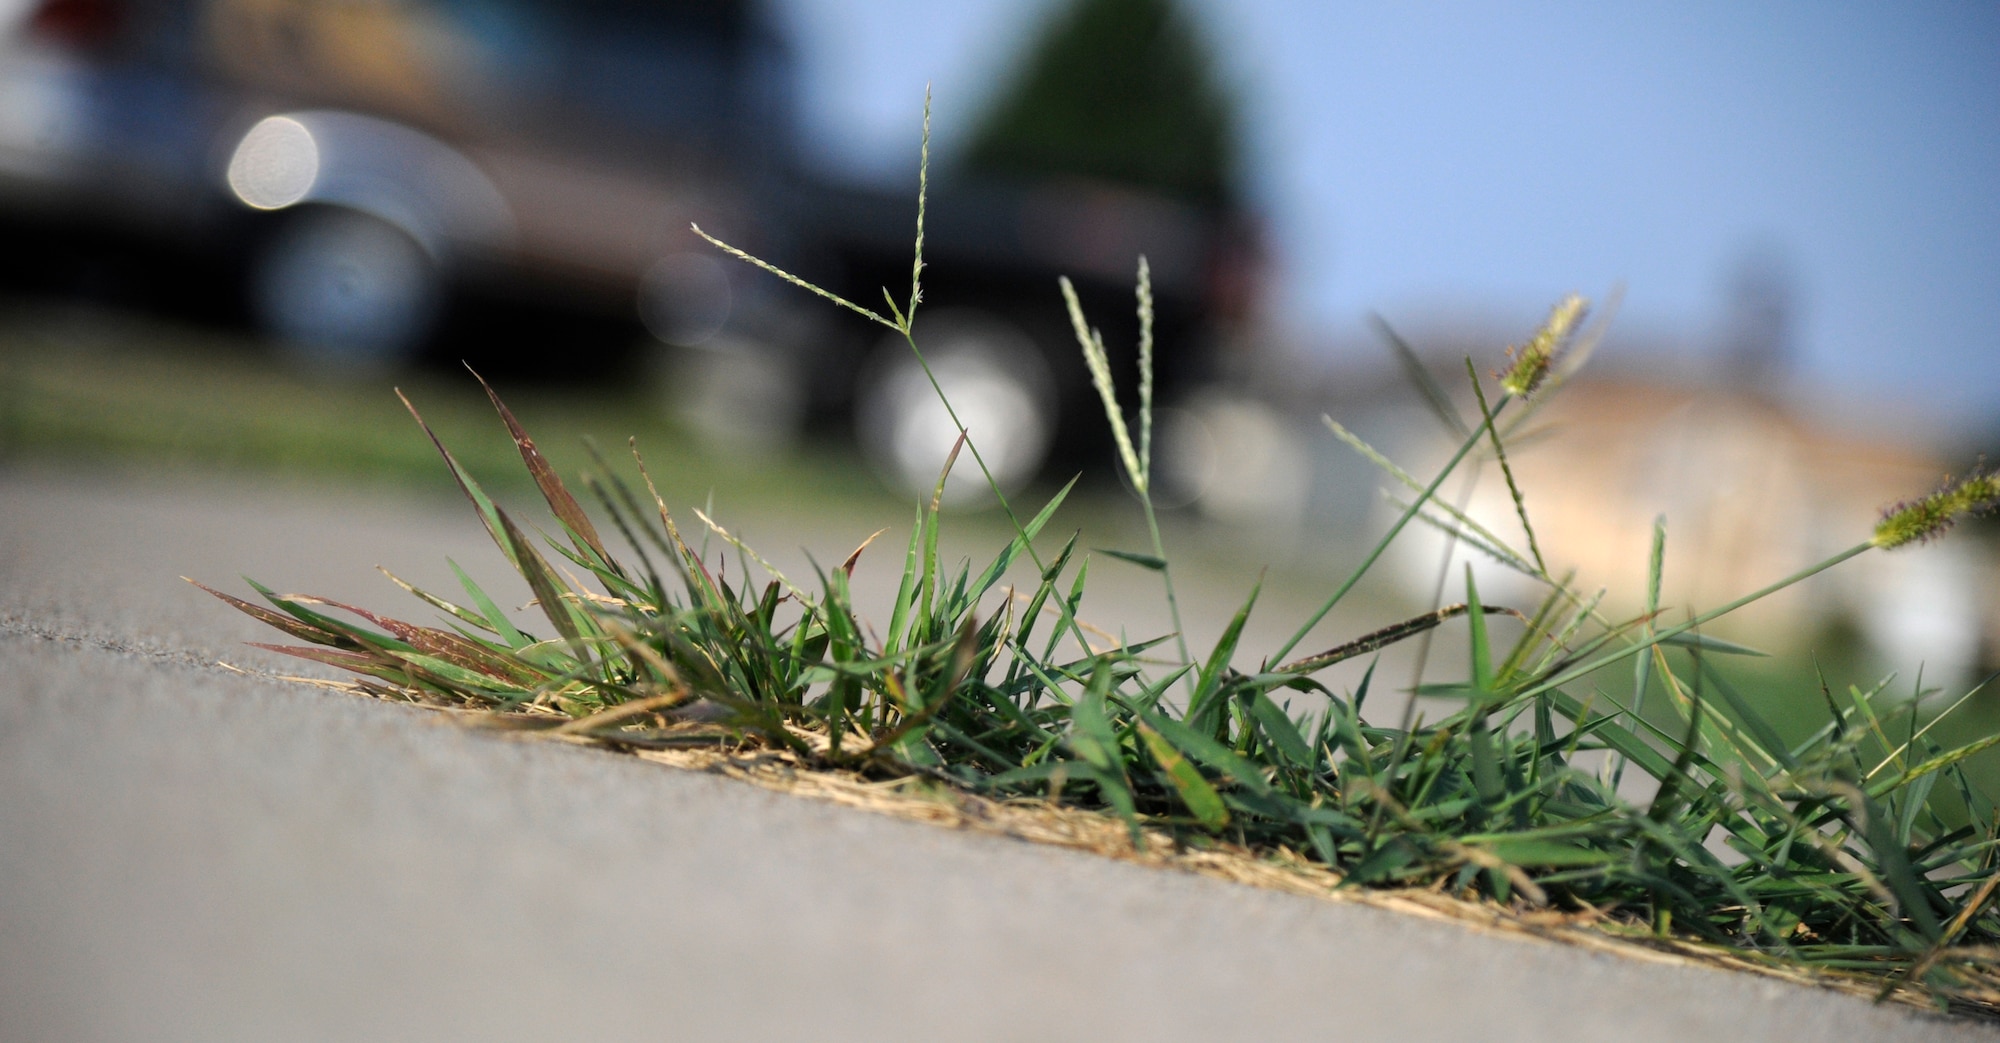 WHITEMAN AIR FORCE BASE, Mo. - Grass grows out of a sidewalk in base housing here July 28, 2011. The housing office here said removing grass from cracks, driveways, curbs and doorsteps will help preserve the concrete as well as make the community safer and more appealing. (U.S. Air Force photo by Airman 1st Class Cody H. Ramirez)